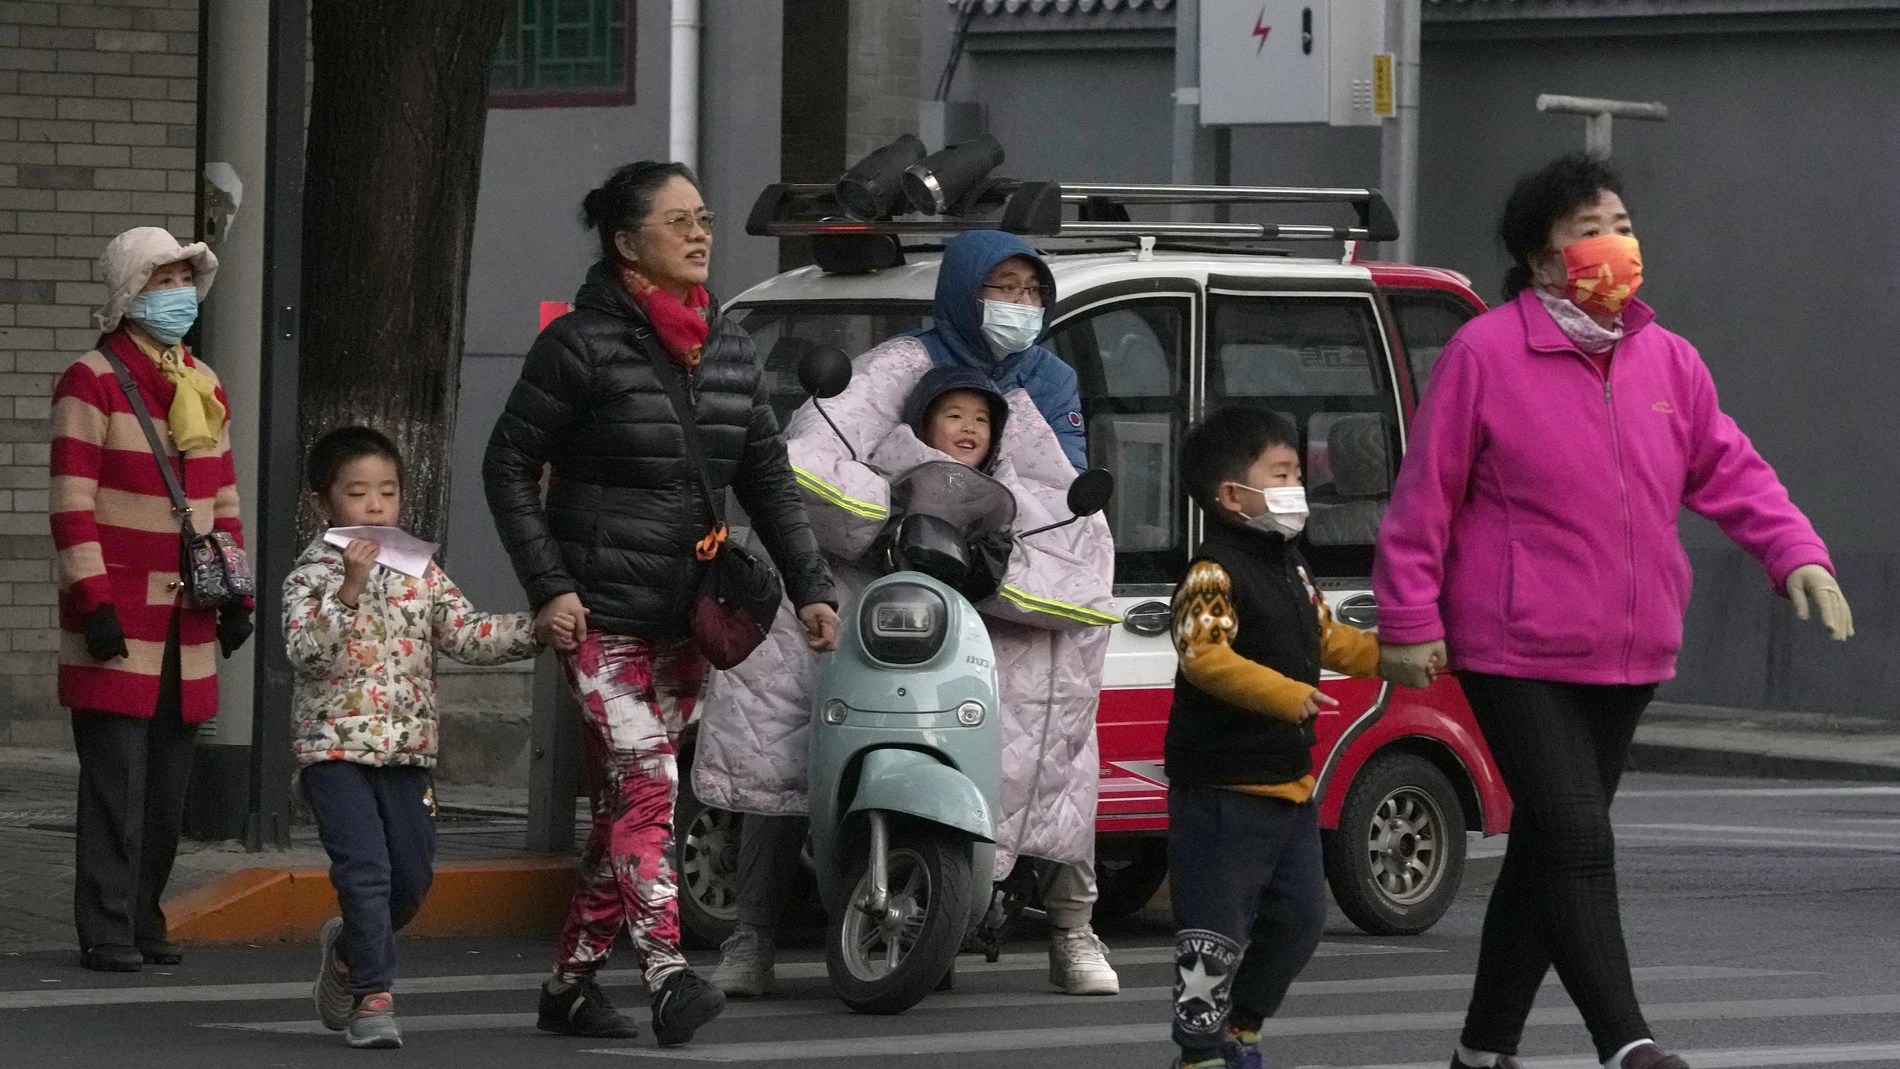 Residents, some wearing masks, cross a road in Beijing, China, Wednesday, Oct. 20, 2021. China's capital Beijing has begun offering booster shots against COVID-19, four months before the city and surrounding regions are to host the Winter Olympics. (AP Photo/Ng Han Guan)